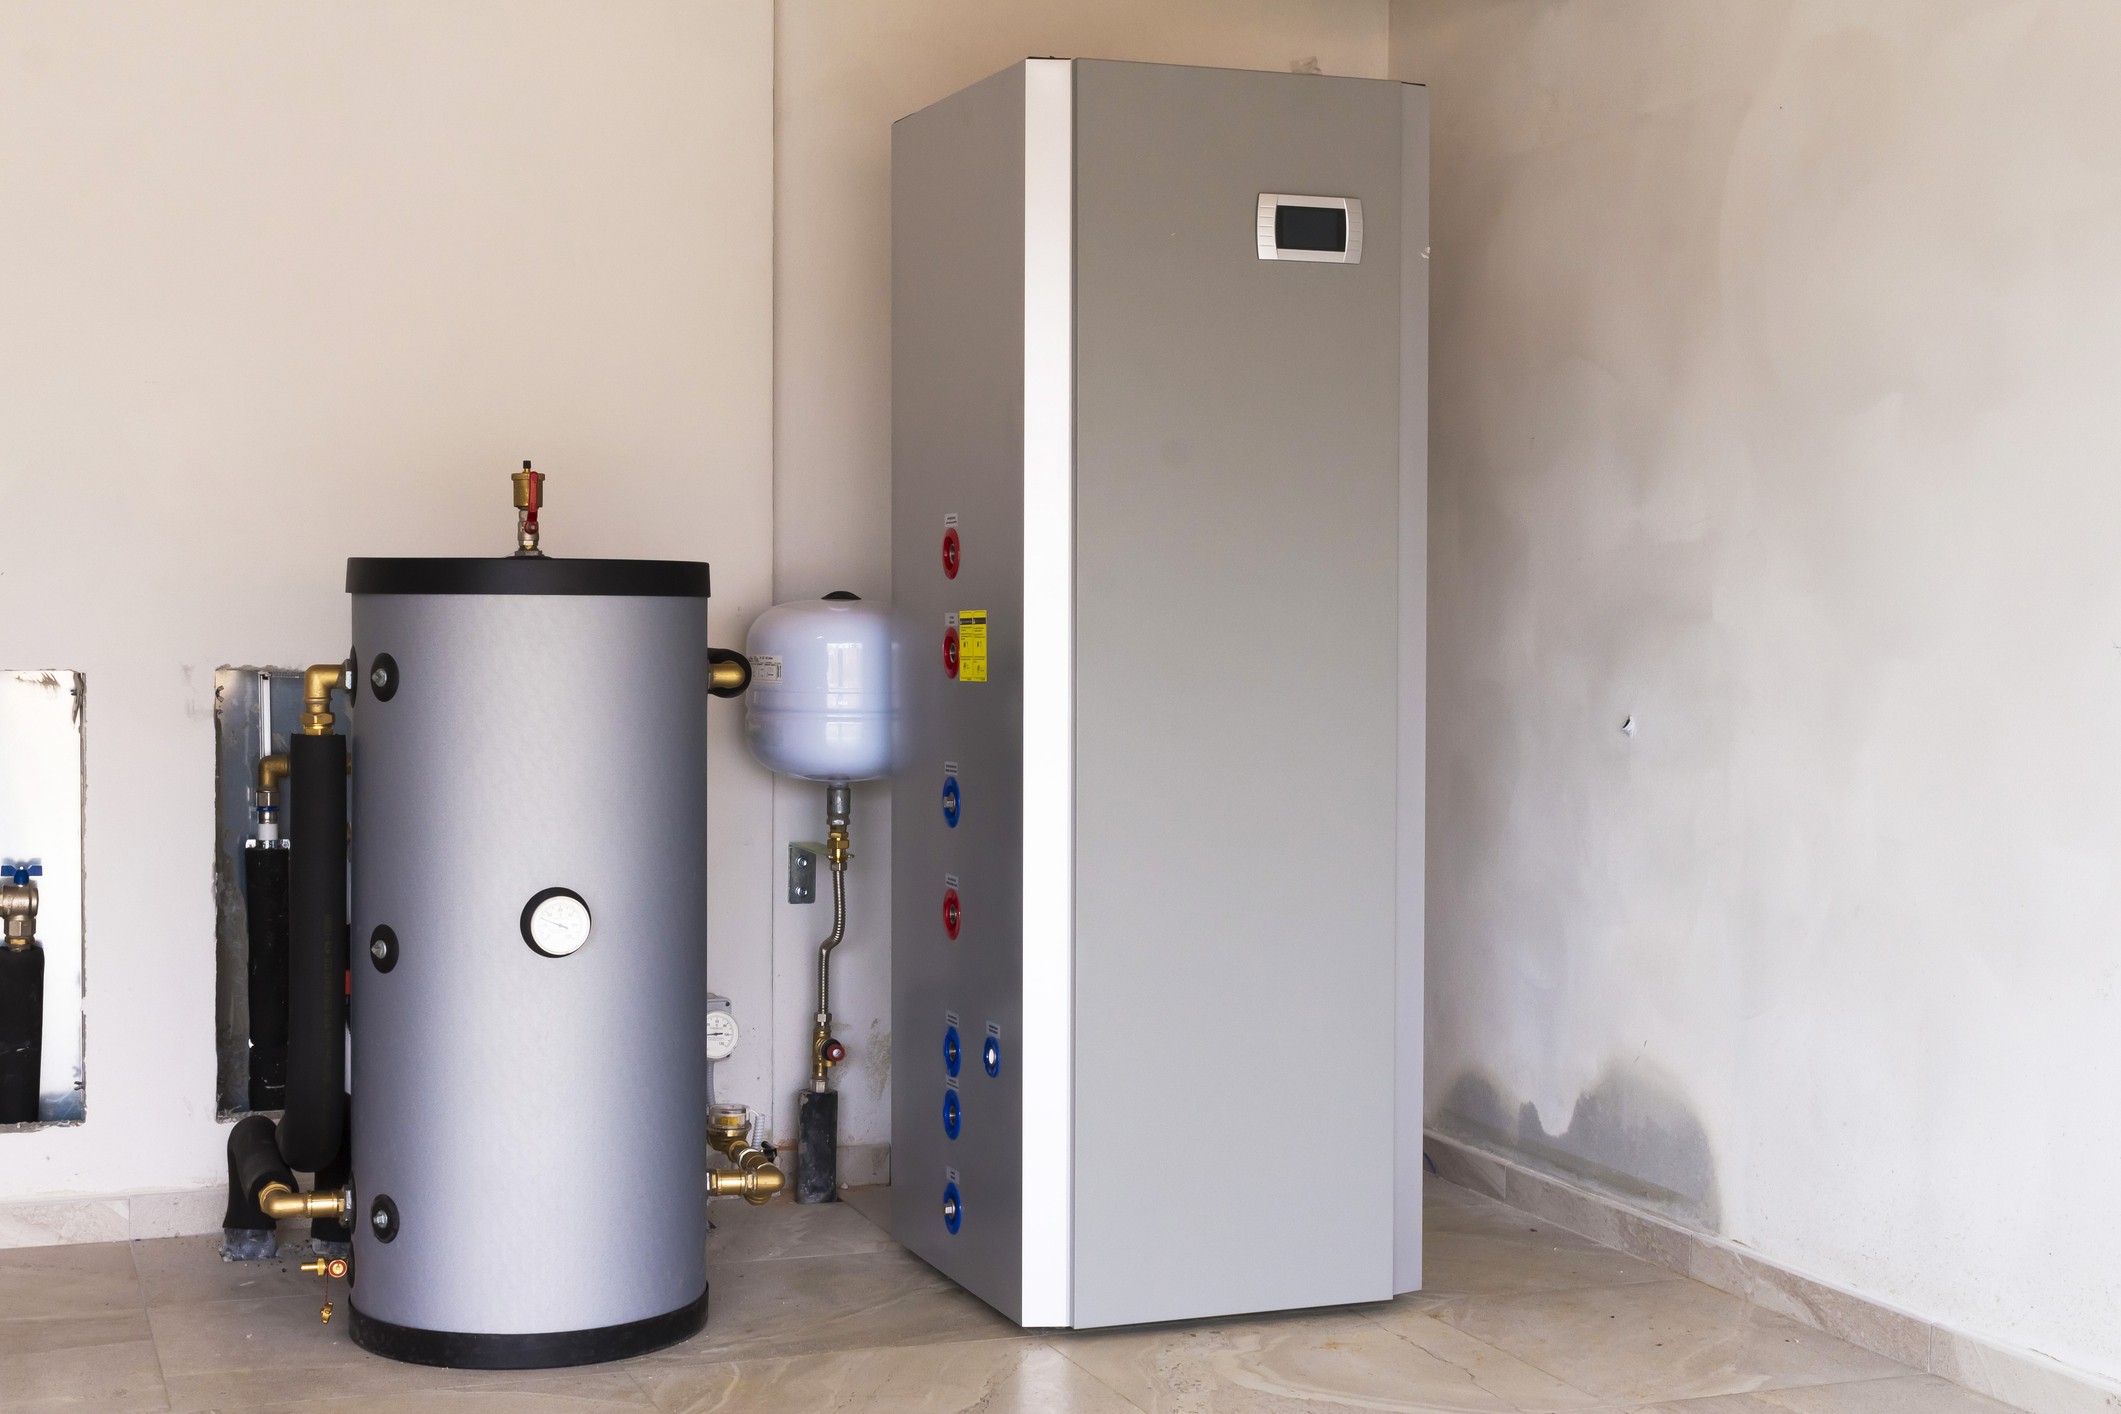 Costs to Install a Heat Pump Water Heater